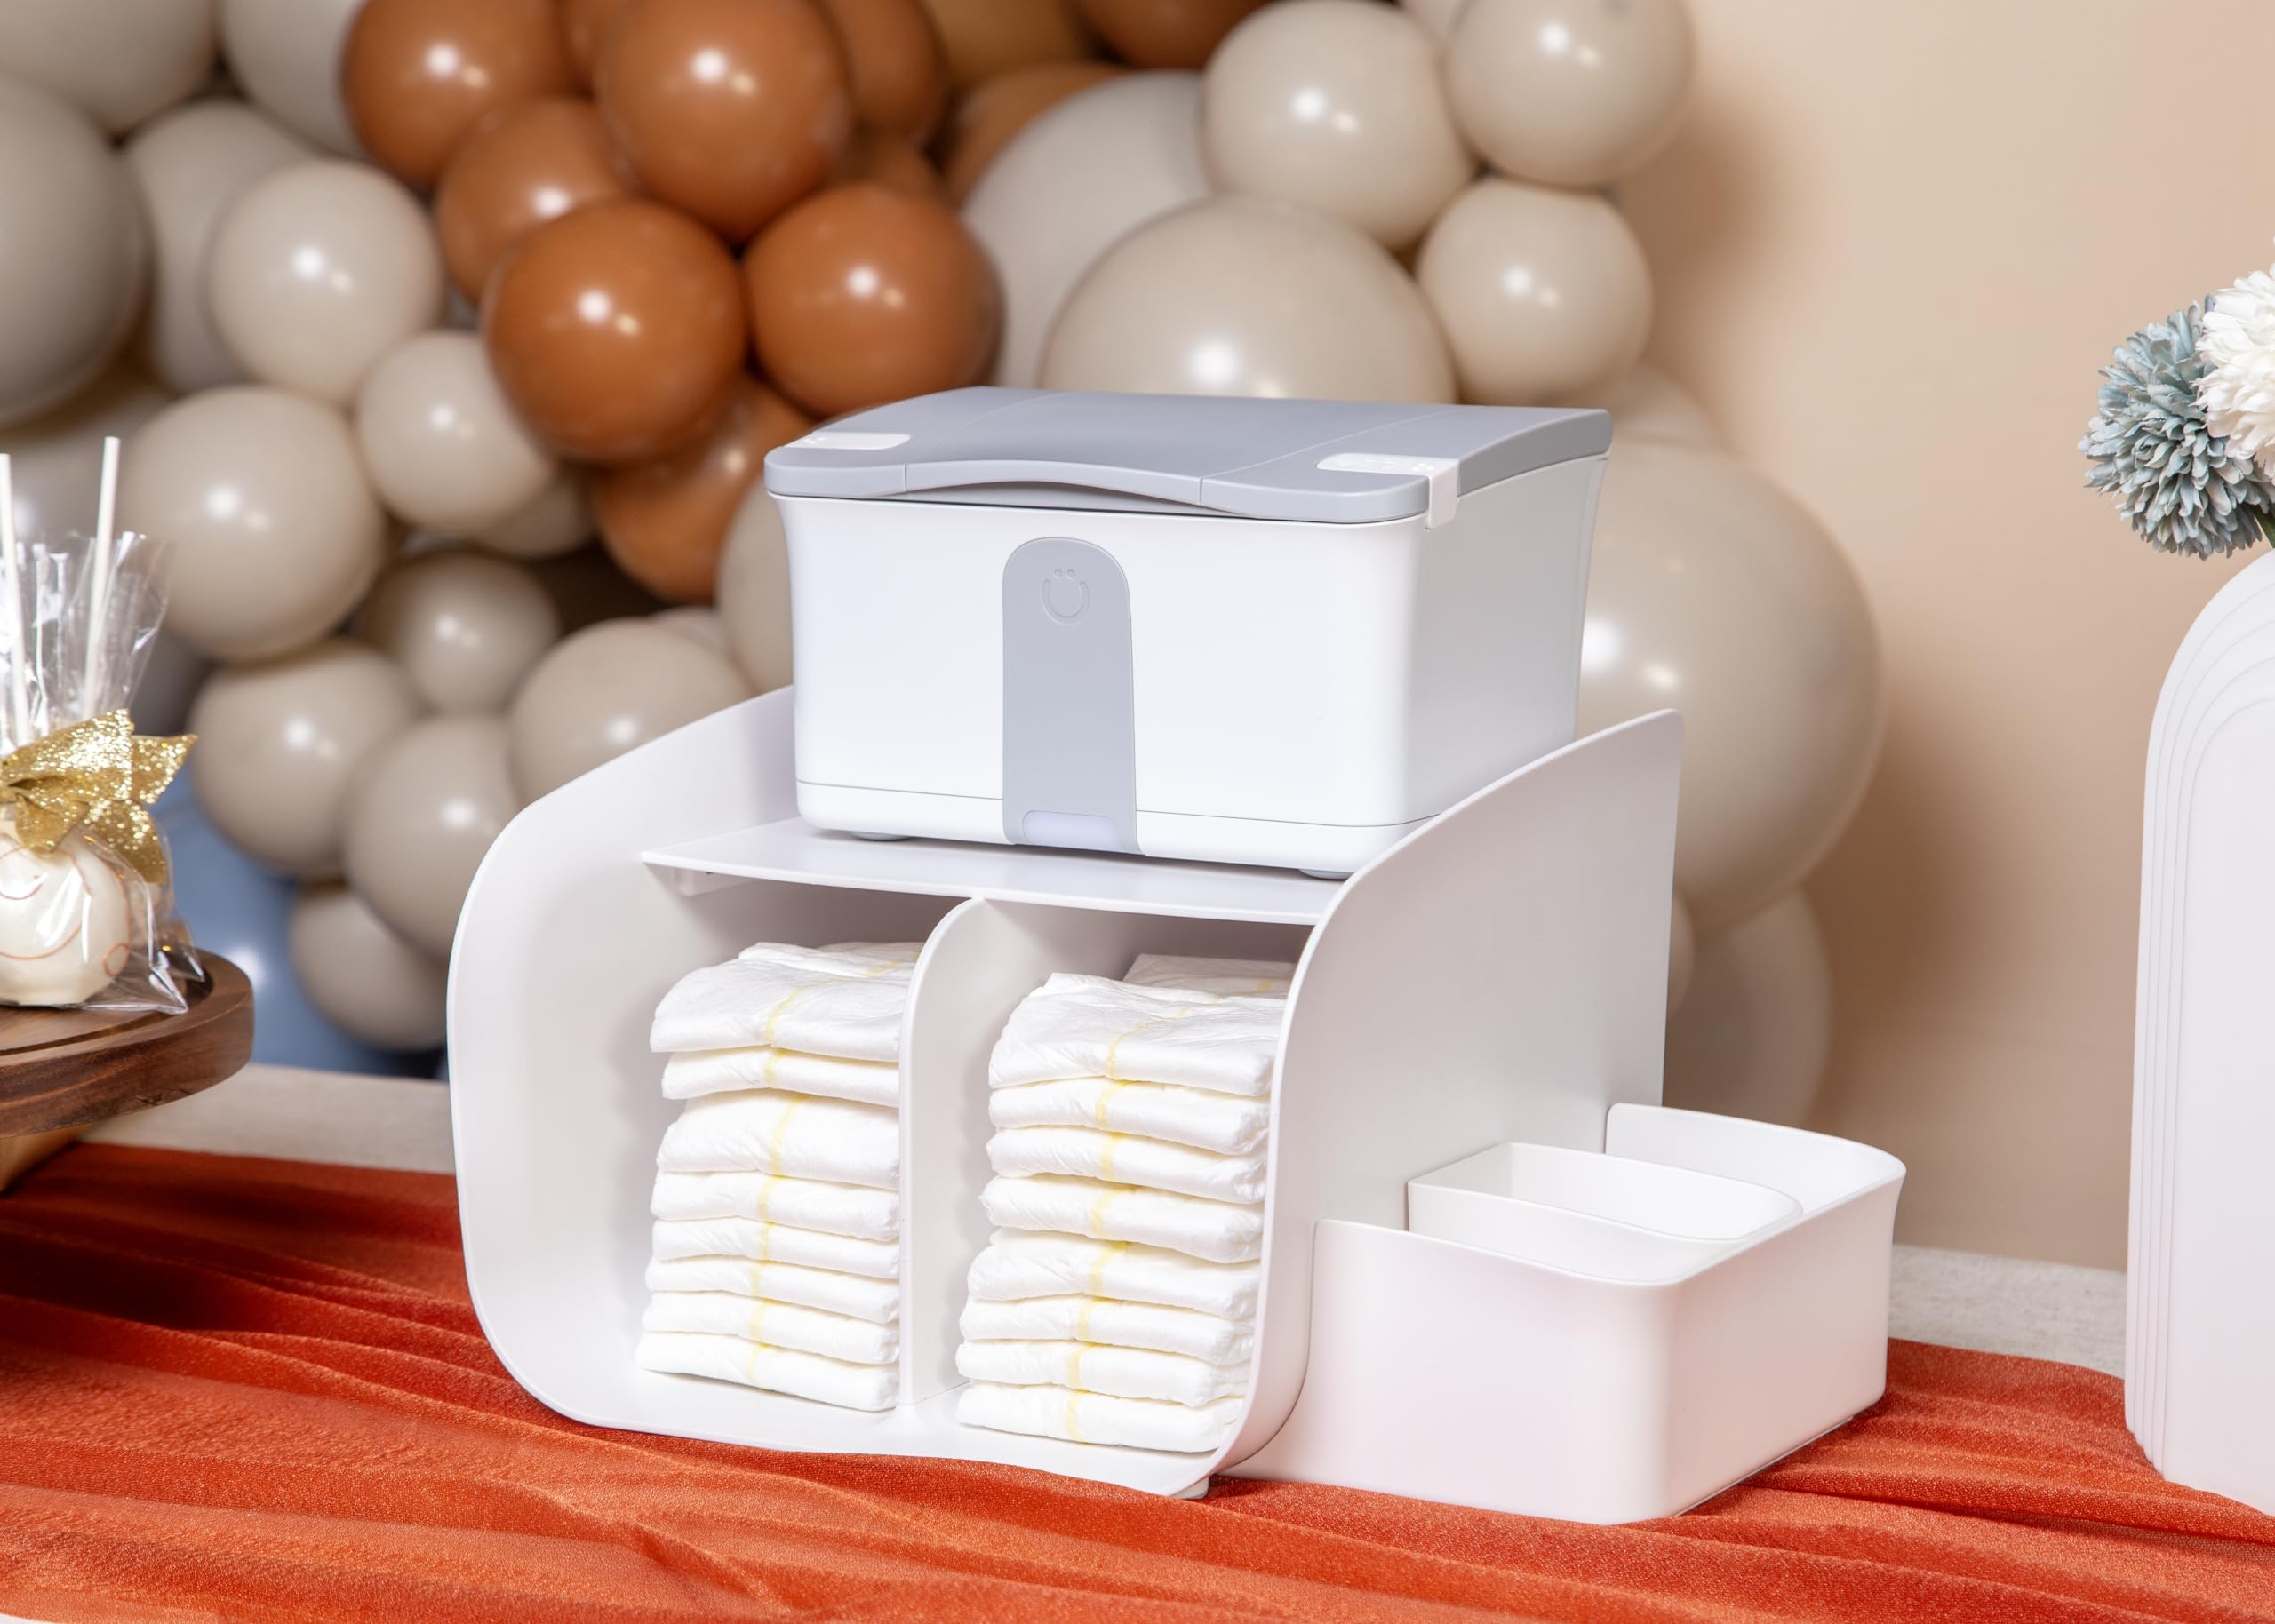 Ubbi Tabletop Diaper Caddy, Diaper Storage, Caddy Organizer, Stores Baby Diapers, Wipes & Baby Accessories, White